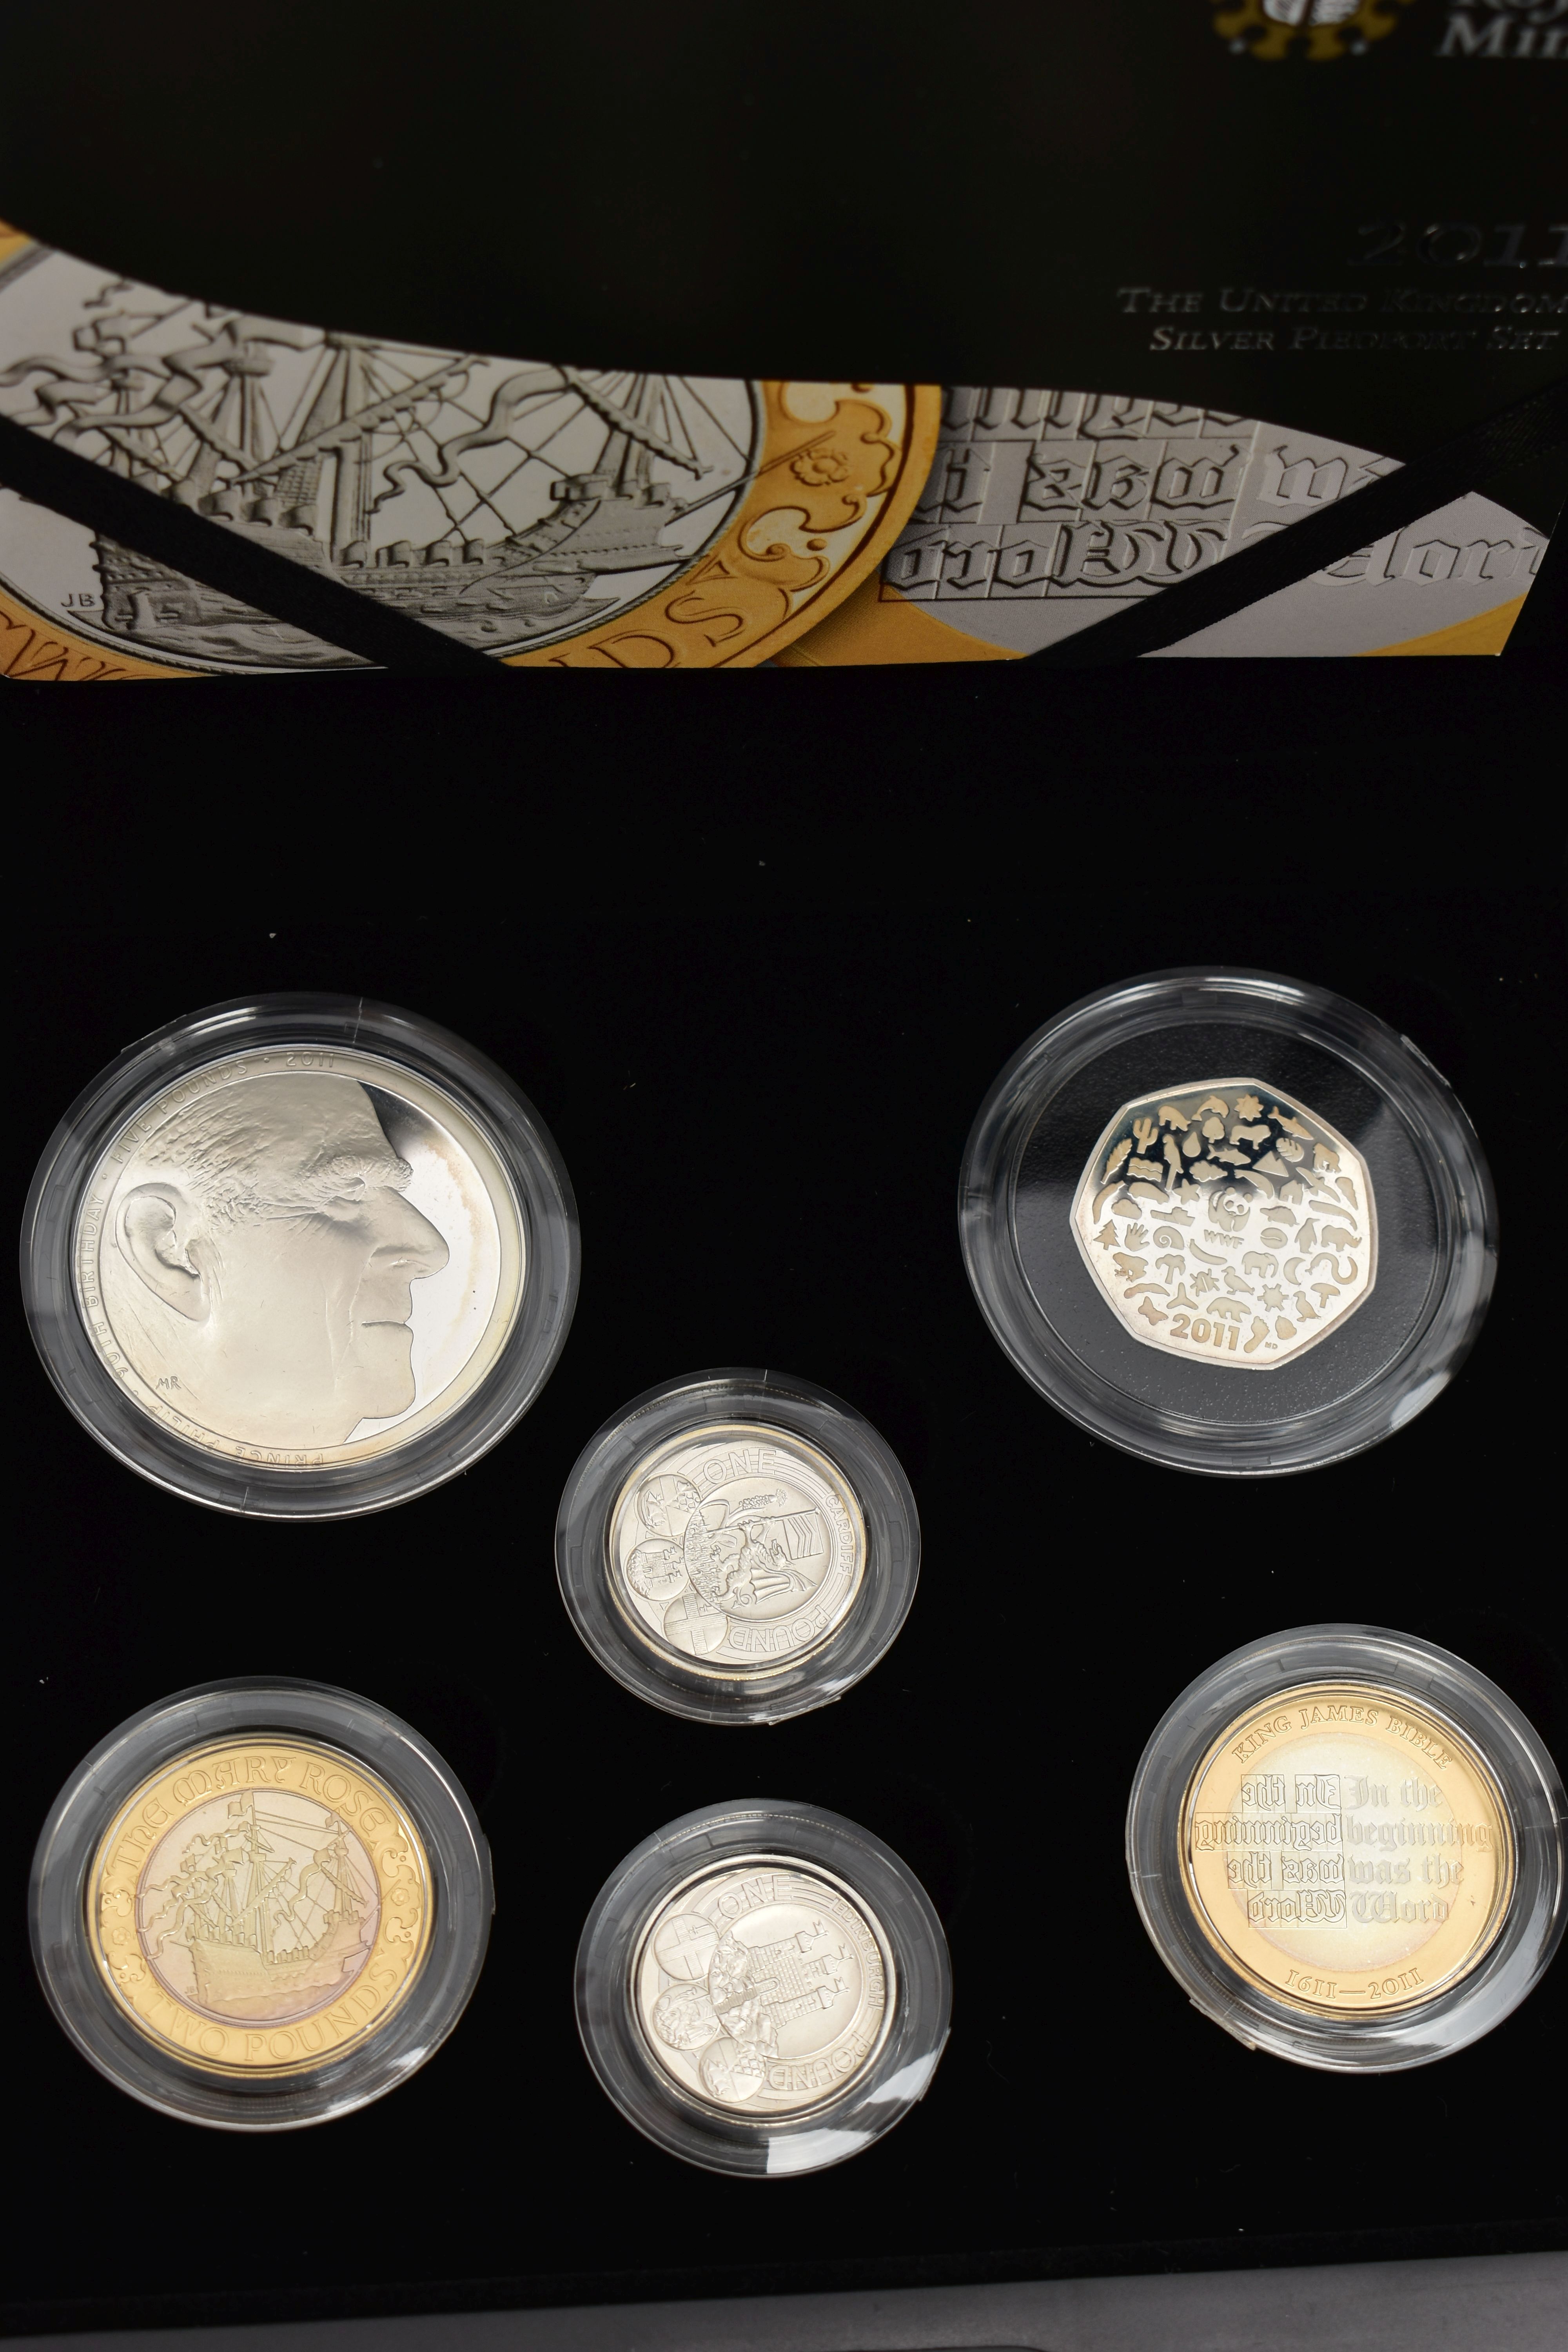 ROYAL MINT ELIZABETH II 2010, 2011, UK SILVER PROOF PIEDFORT COLLECTIONS, 2010 set is a £5 con - Image 4 of 5